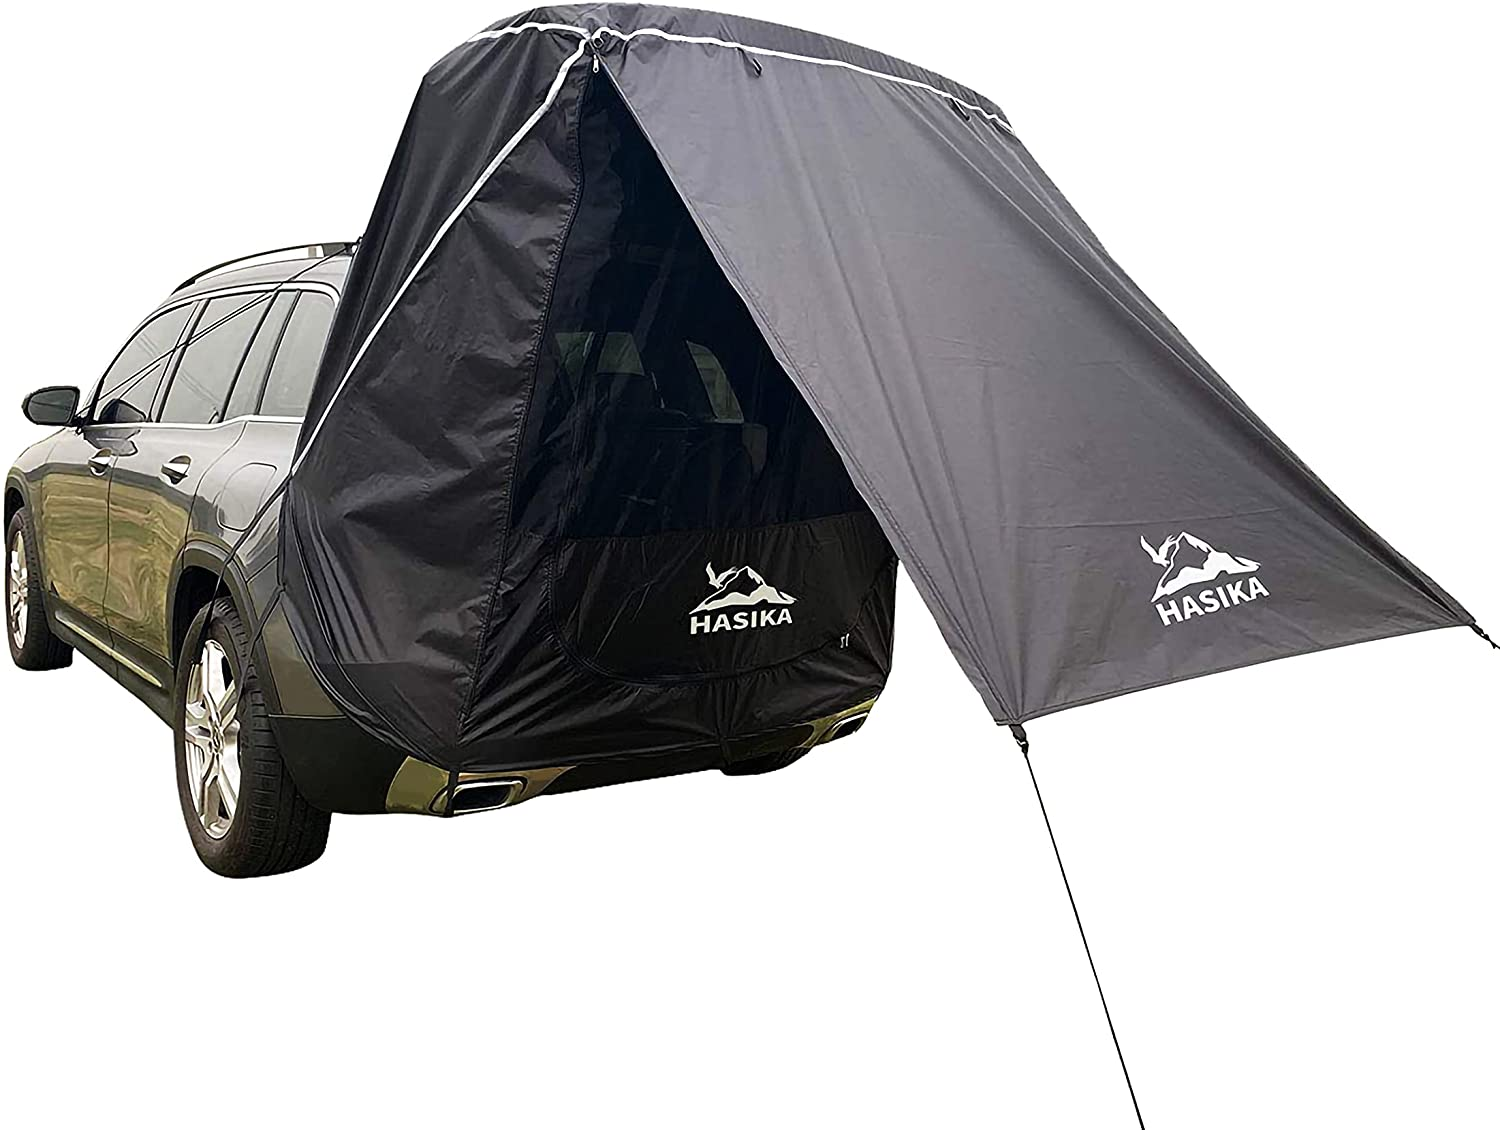 Hasika Tailgate Shade Awning Tent for Car Camping Road Trip Essentials Midsize to Full Size SUV Van Waterproof 3000mm UPF 50+ Black (Small)